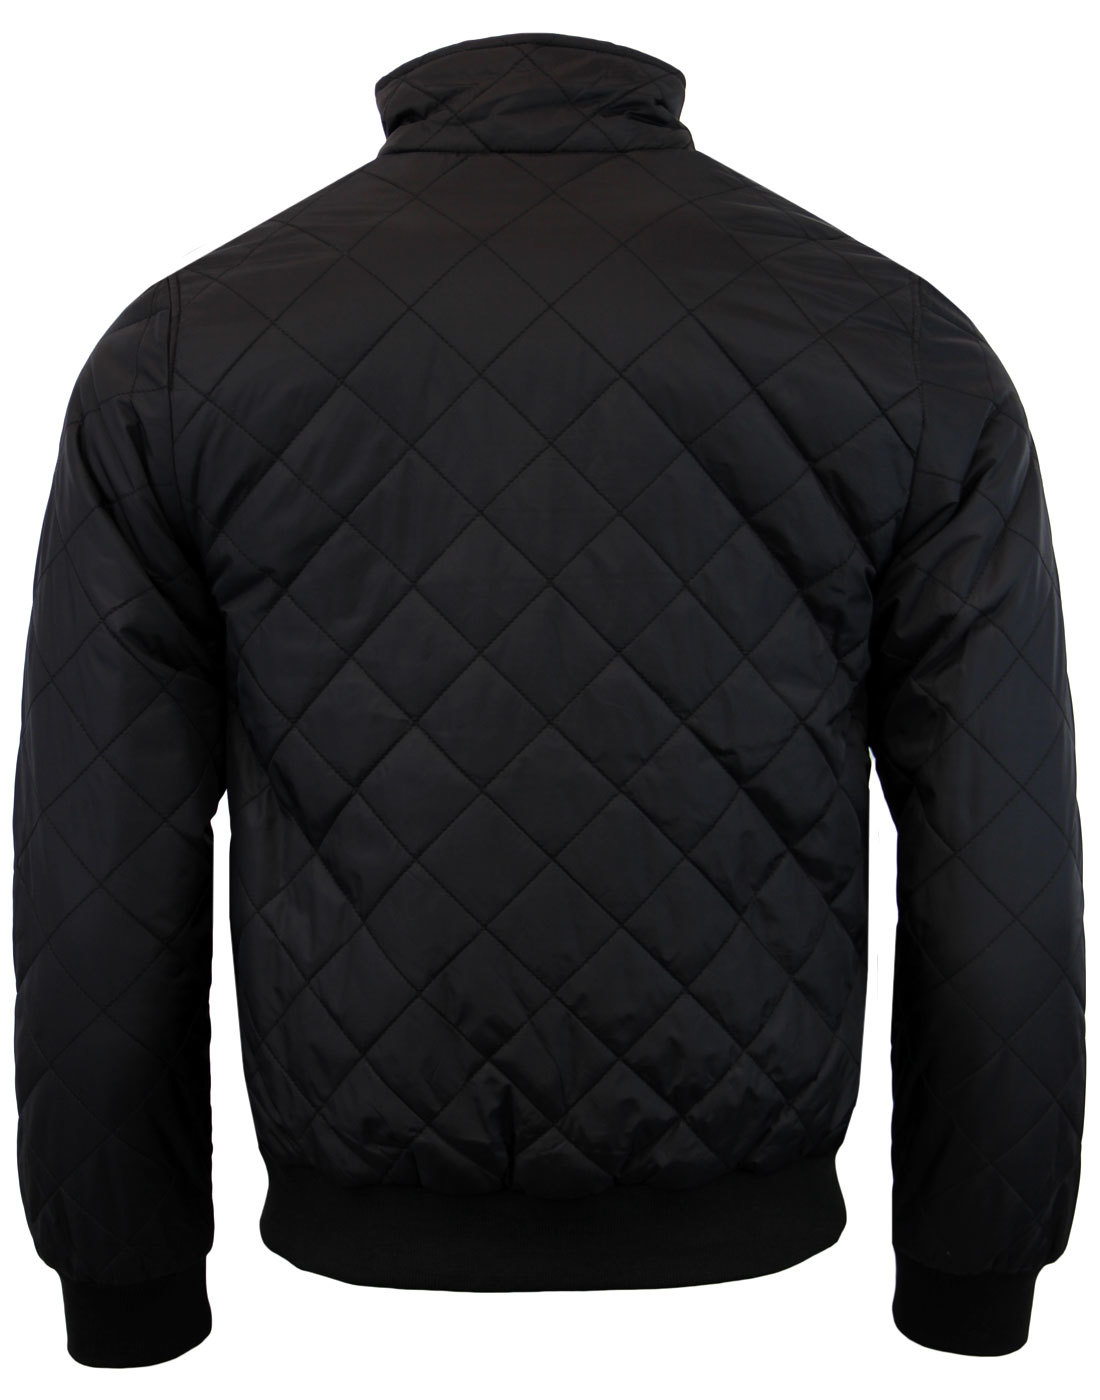 MERC Hume Retro Indie Mod Quilted Harrington Jacket in Black